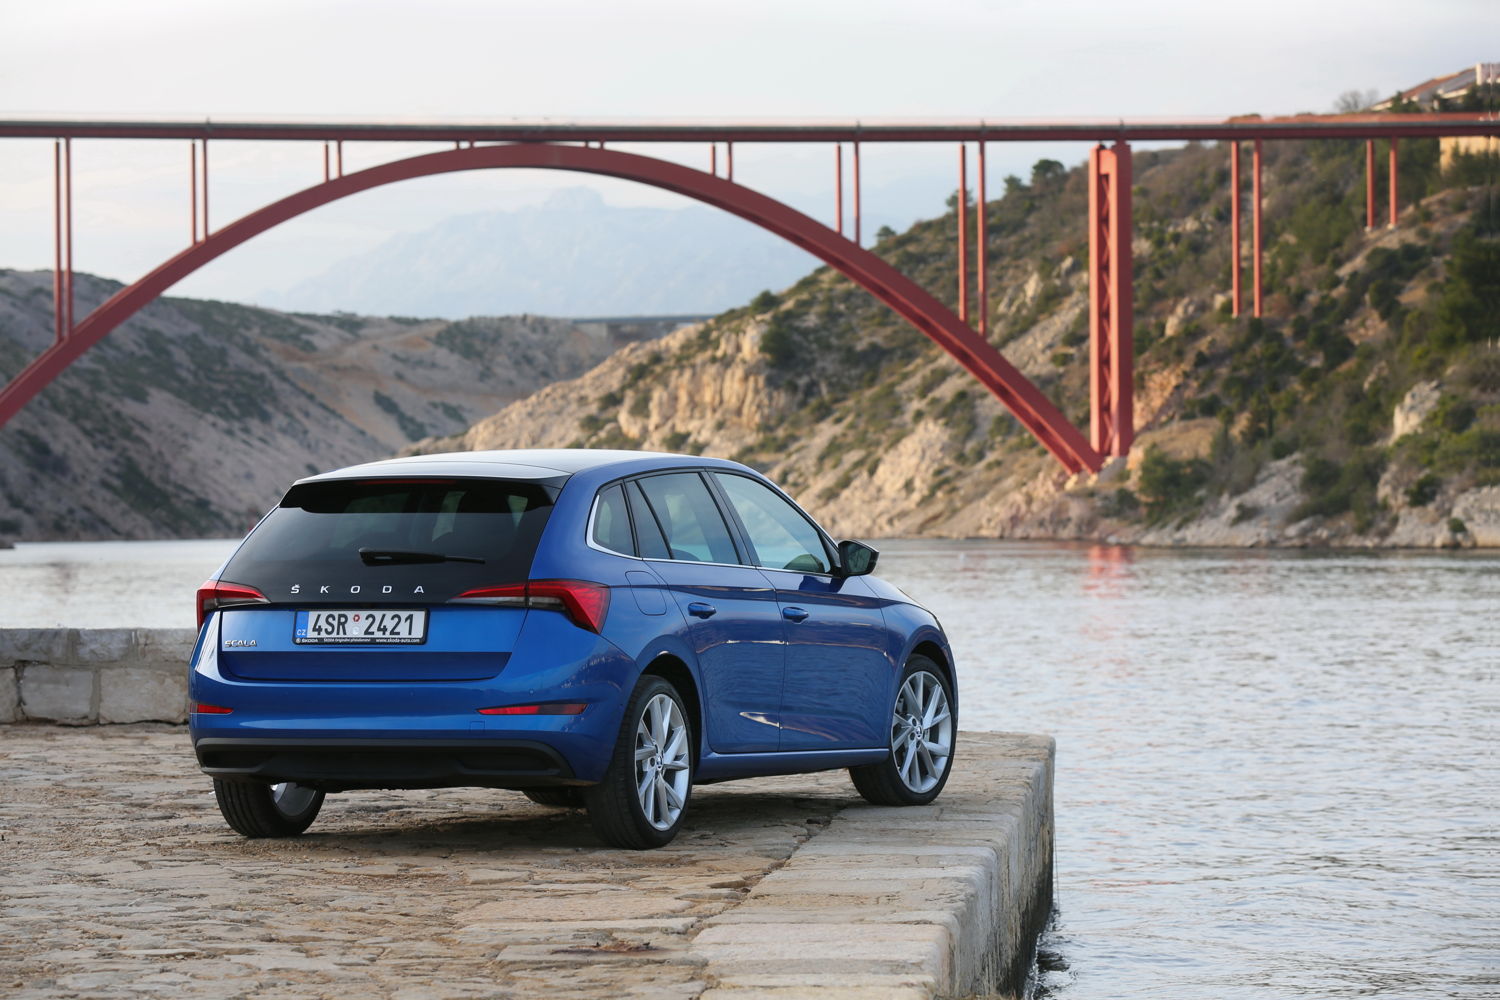 For the ŠKODA SCALA, the sporty metallic Race Blue
underlines its dynamic and emotive design and combines
perfectly with the black panoramic roof and extended black
rear window from the optional Emotion package. In total,
17.4% of all ŠKODA SCALA produced in 2019 were
painted this colour. 